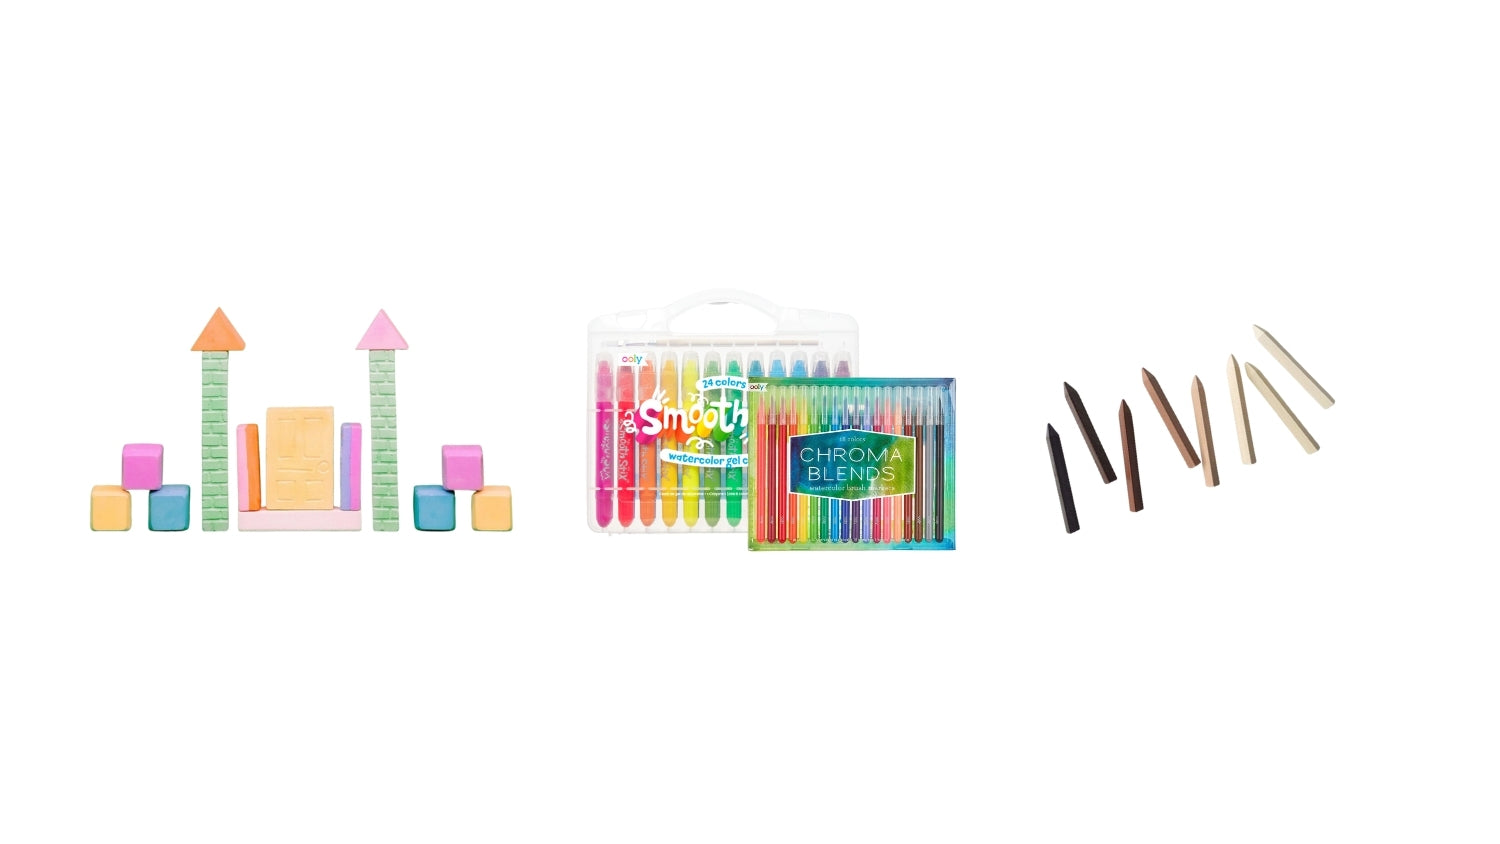 Baby and Kids Art Supplies / KindyEcobaby